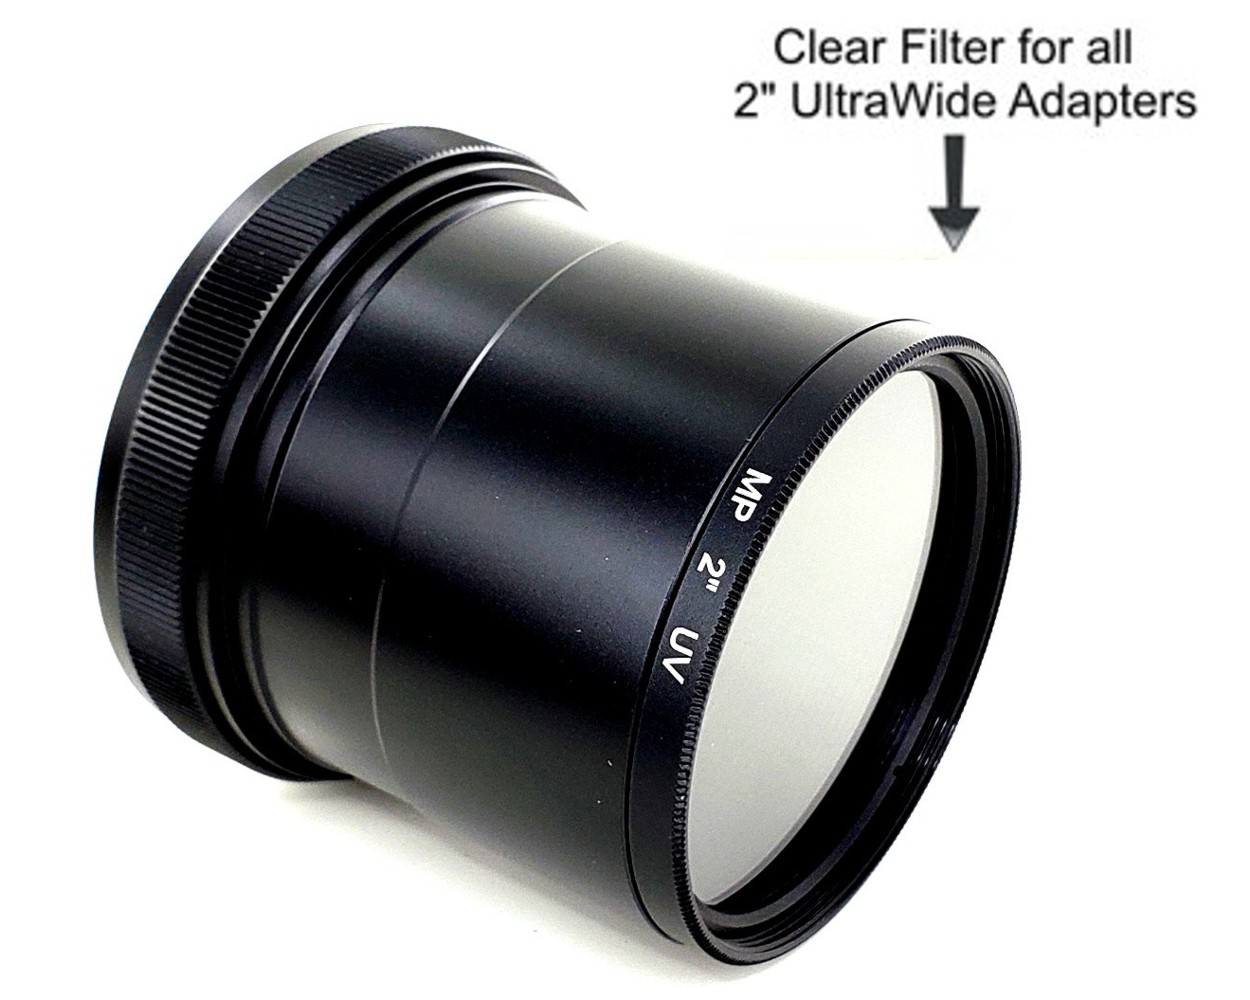 2" Clear Glass Dust Filter